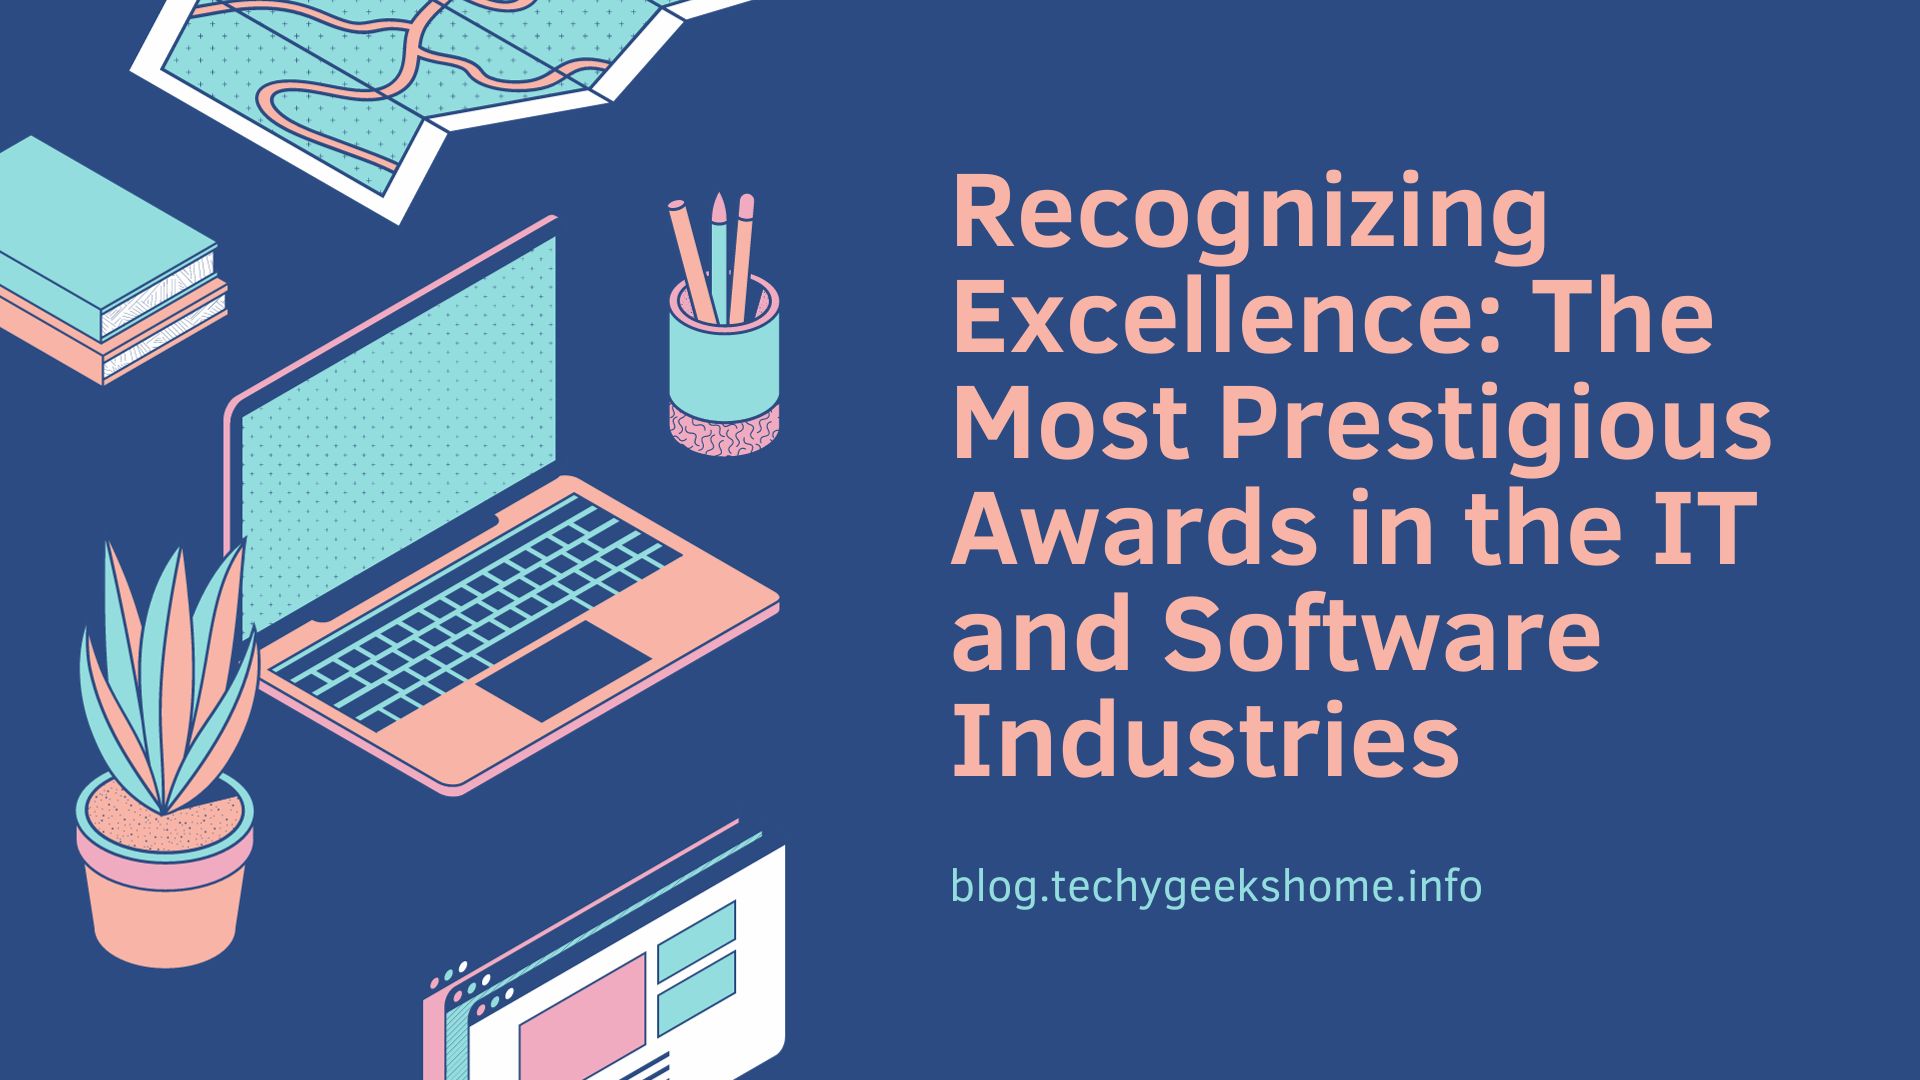 Recognizing Excellence The Most Prestigious Awards in the IT and Software Industries